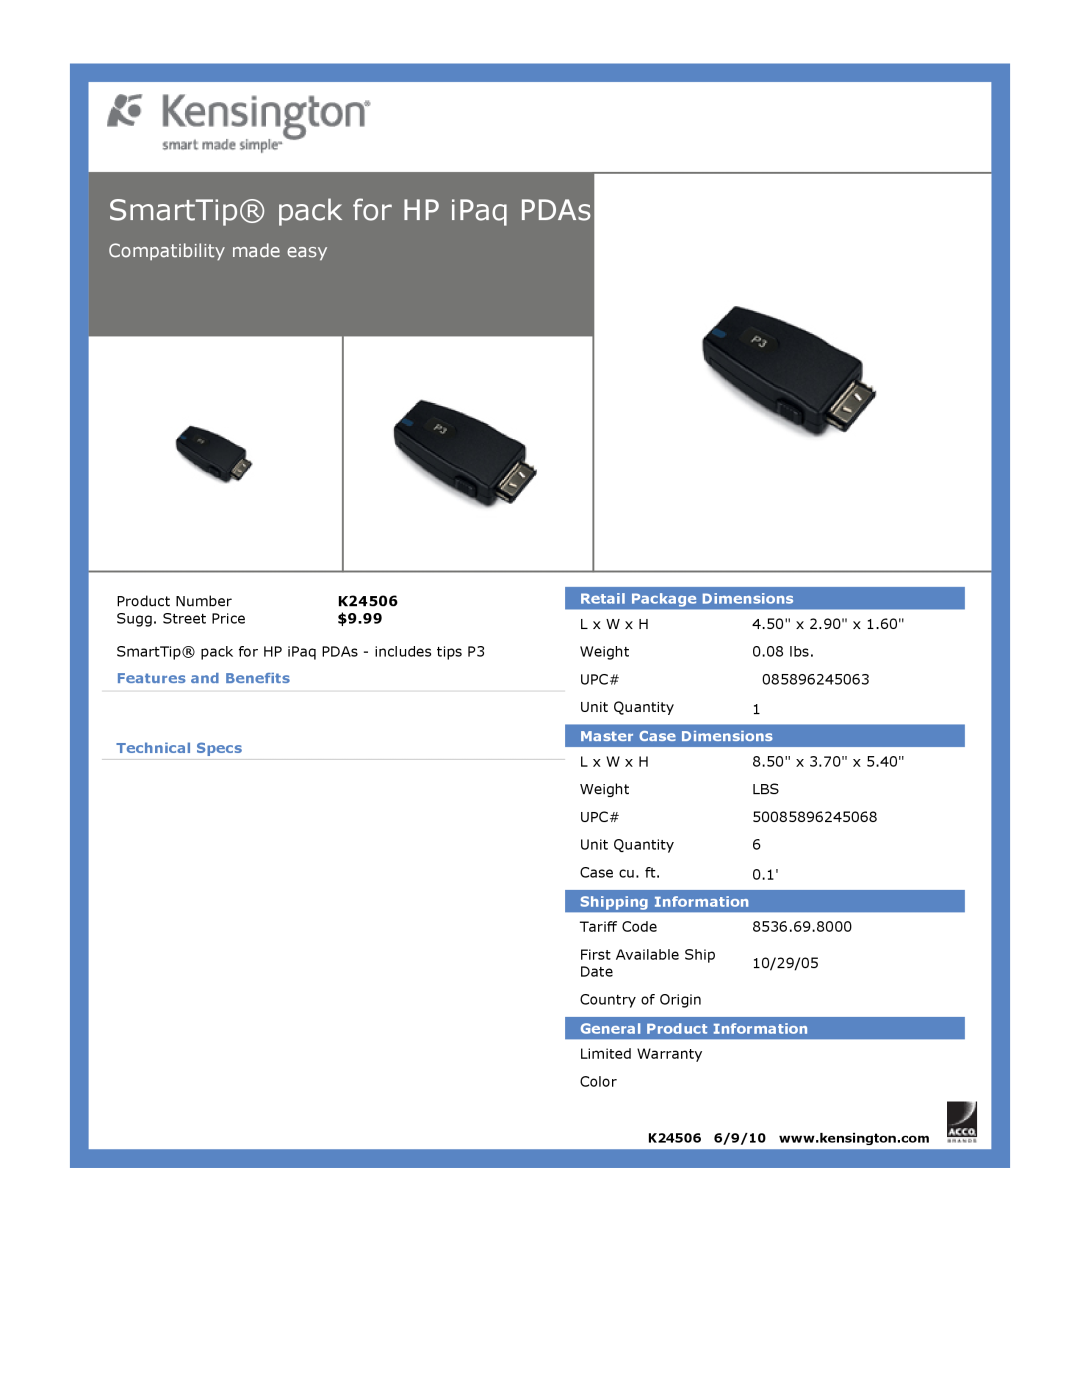 Kensington EU64325 SmartTip pack for HP iPaq PDAs, Compatibility made easy, $9.99, Features and Benefits Technical Specs 